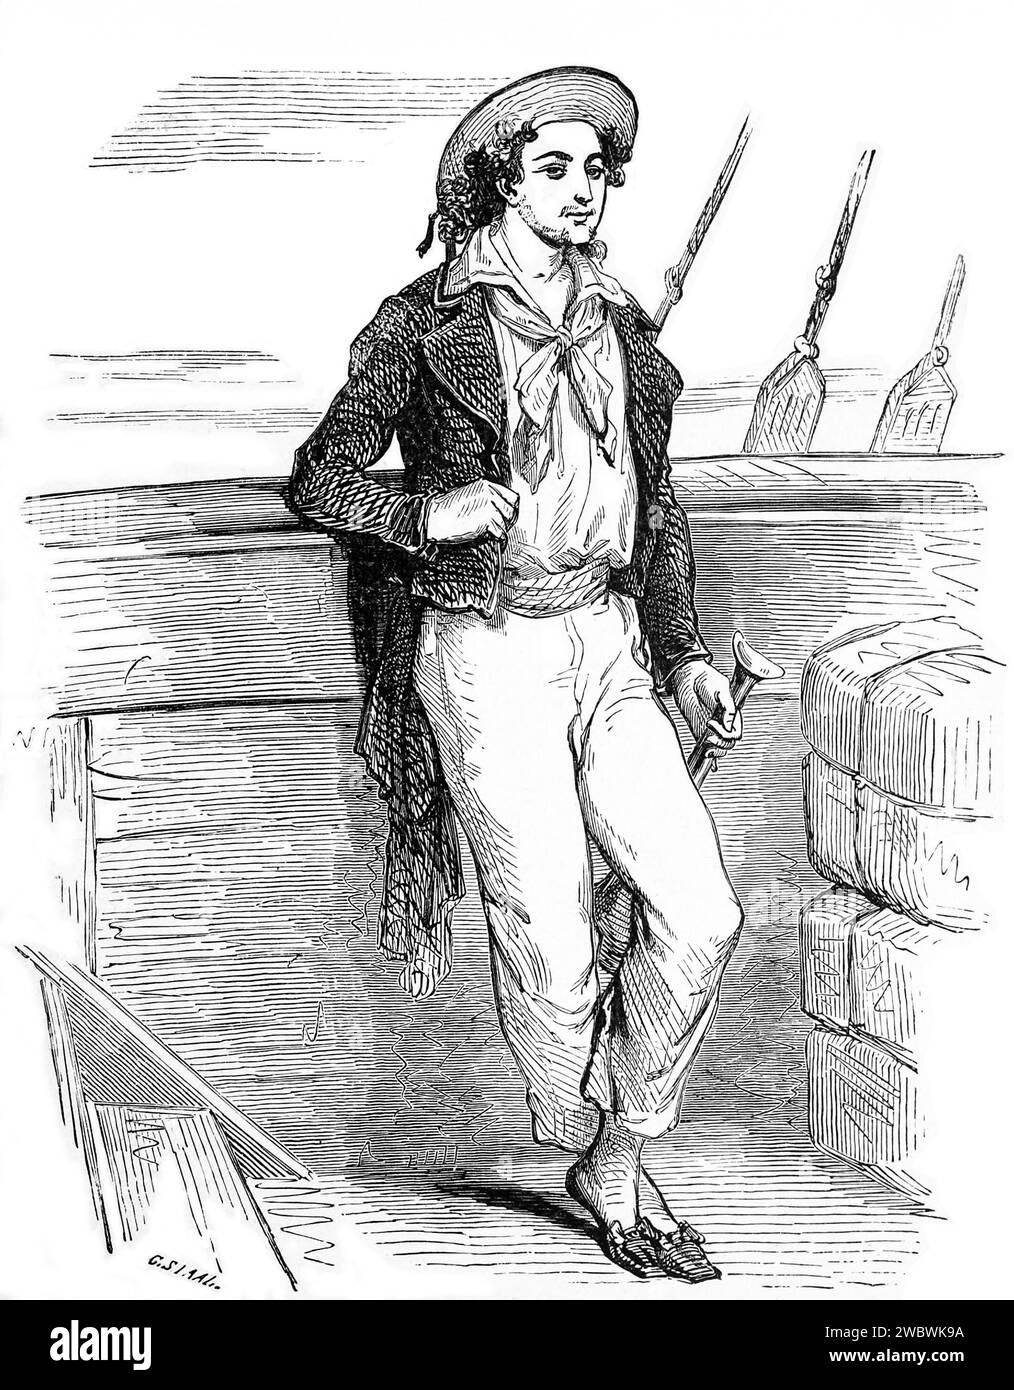 The Count of Monte Cristo by Alexandre Dumas. The main character, Edmond Dantès, as a merchant sailor before his imprisonment (Illustration by Pierre-Gustave Staal - 1888) Stock Photo